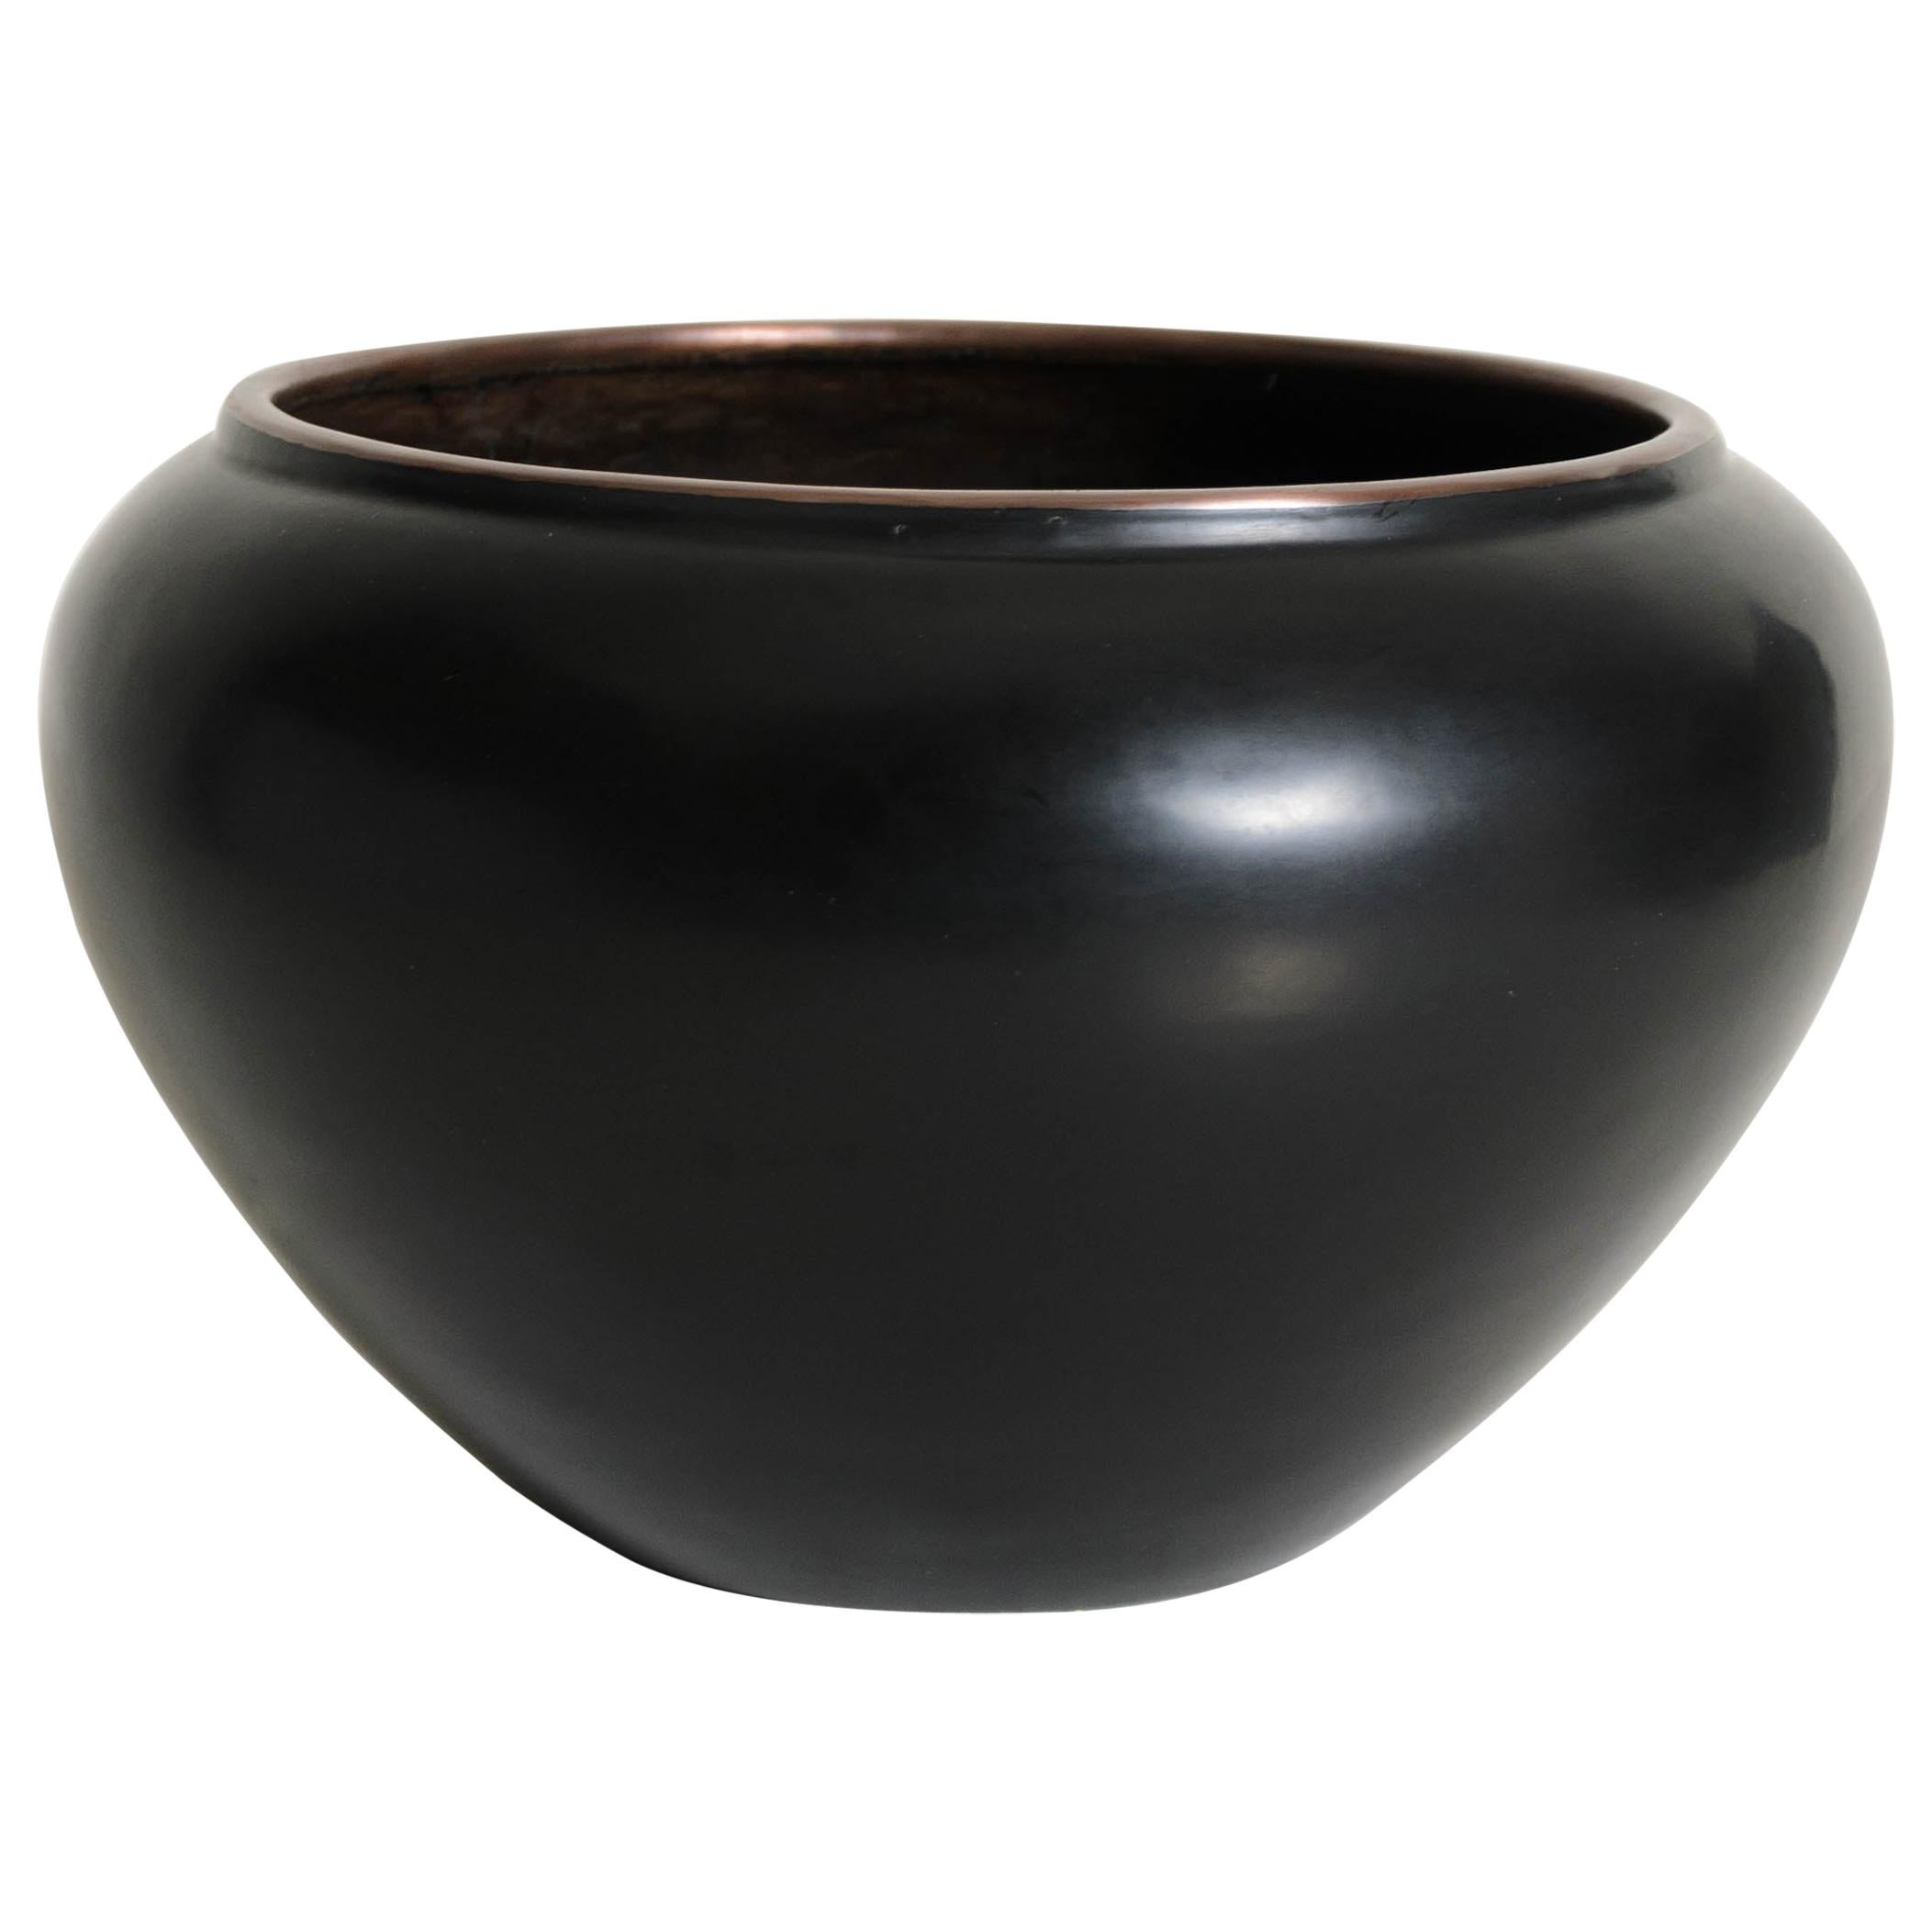 Contemporary Black Lacquer "Bo" Pot with Copper Rim by Robert Kuo